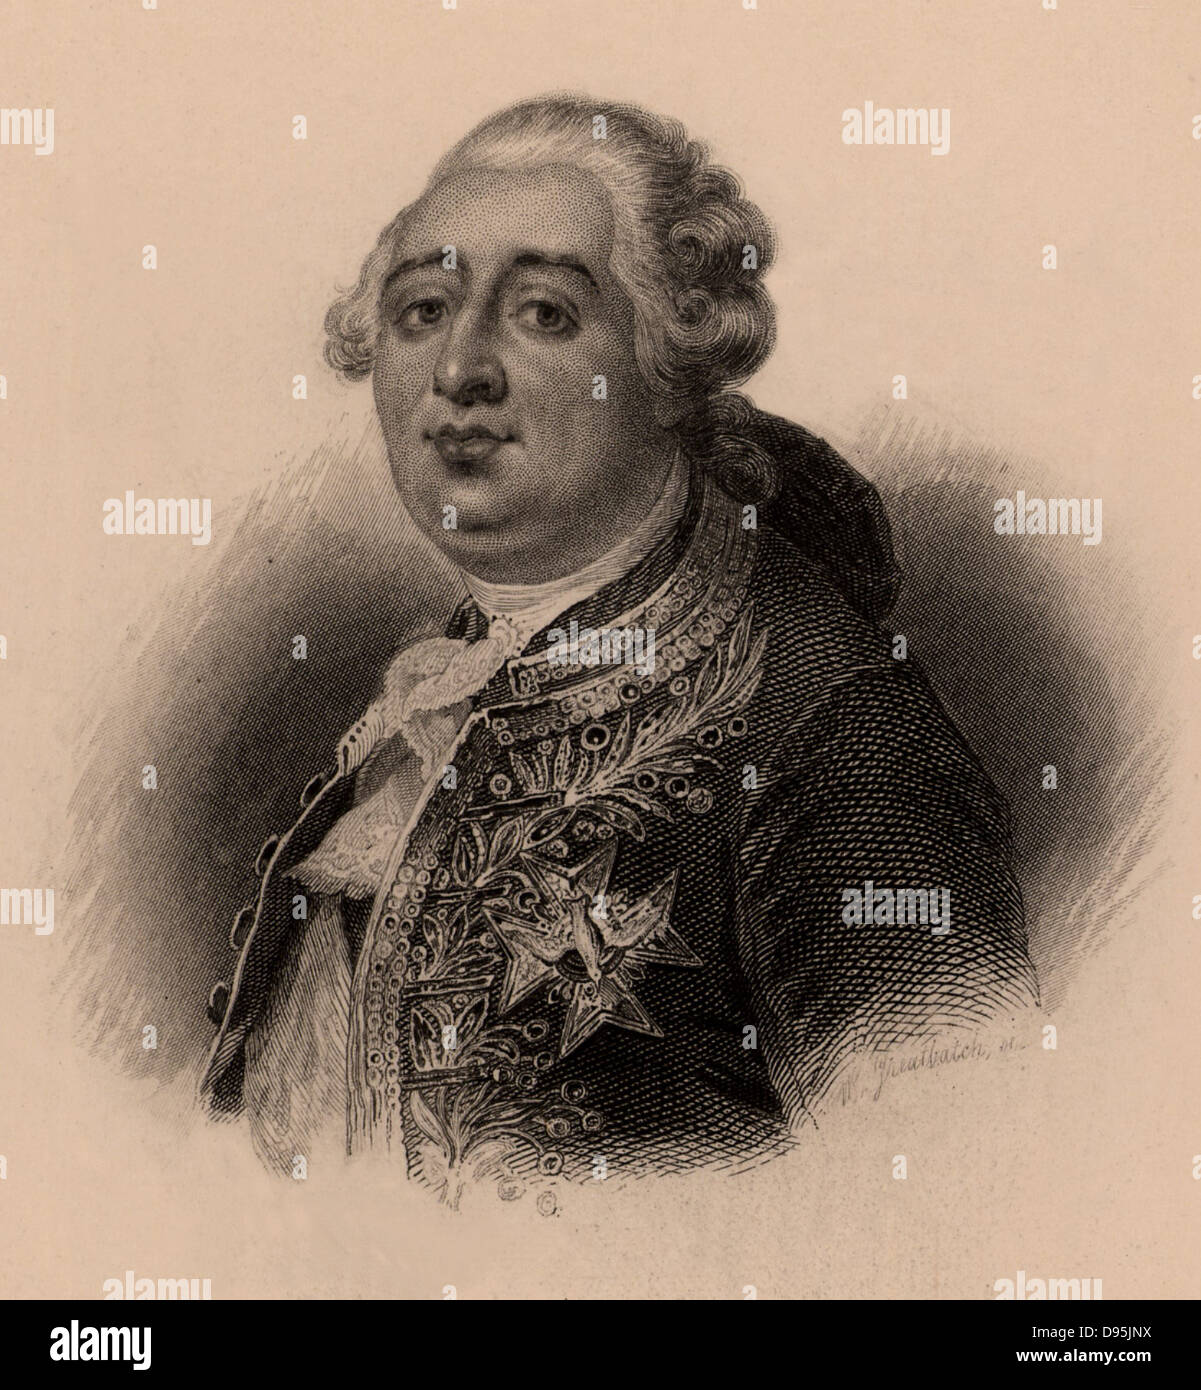 Louis XVI (1754-1793) king of France from 1774, brought to trial by the revolutionary National Convention, December 1792. Guillotined 21 January 1793.  French Revolution. Lithograph. Stock Photo